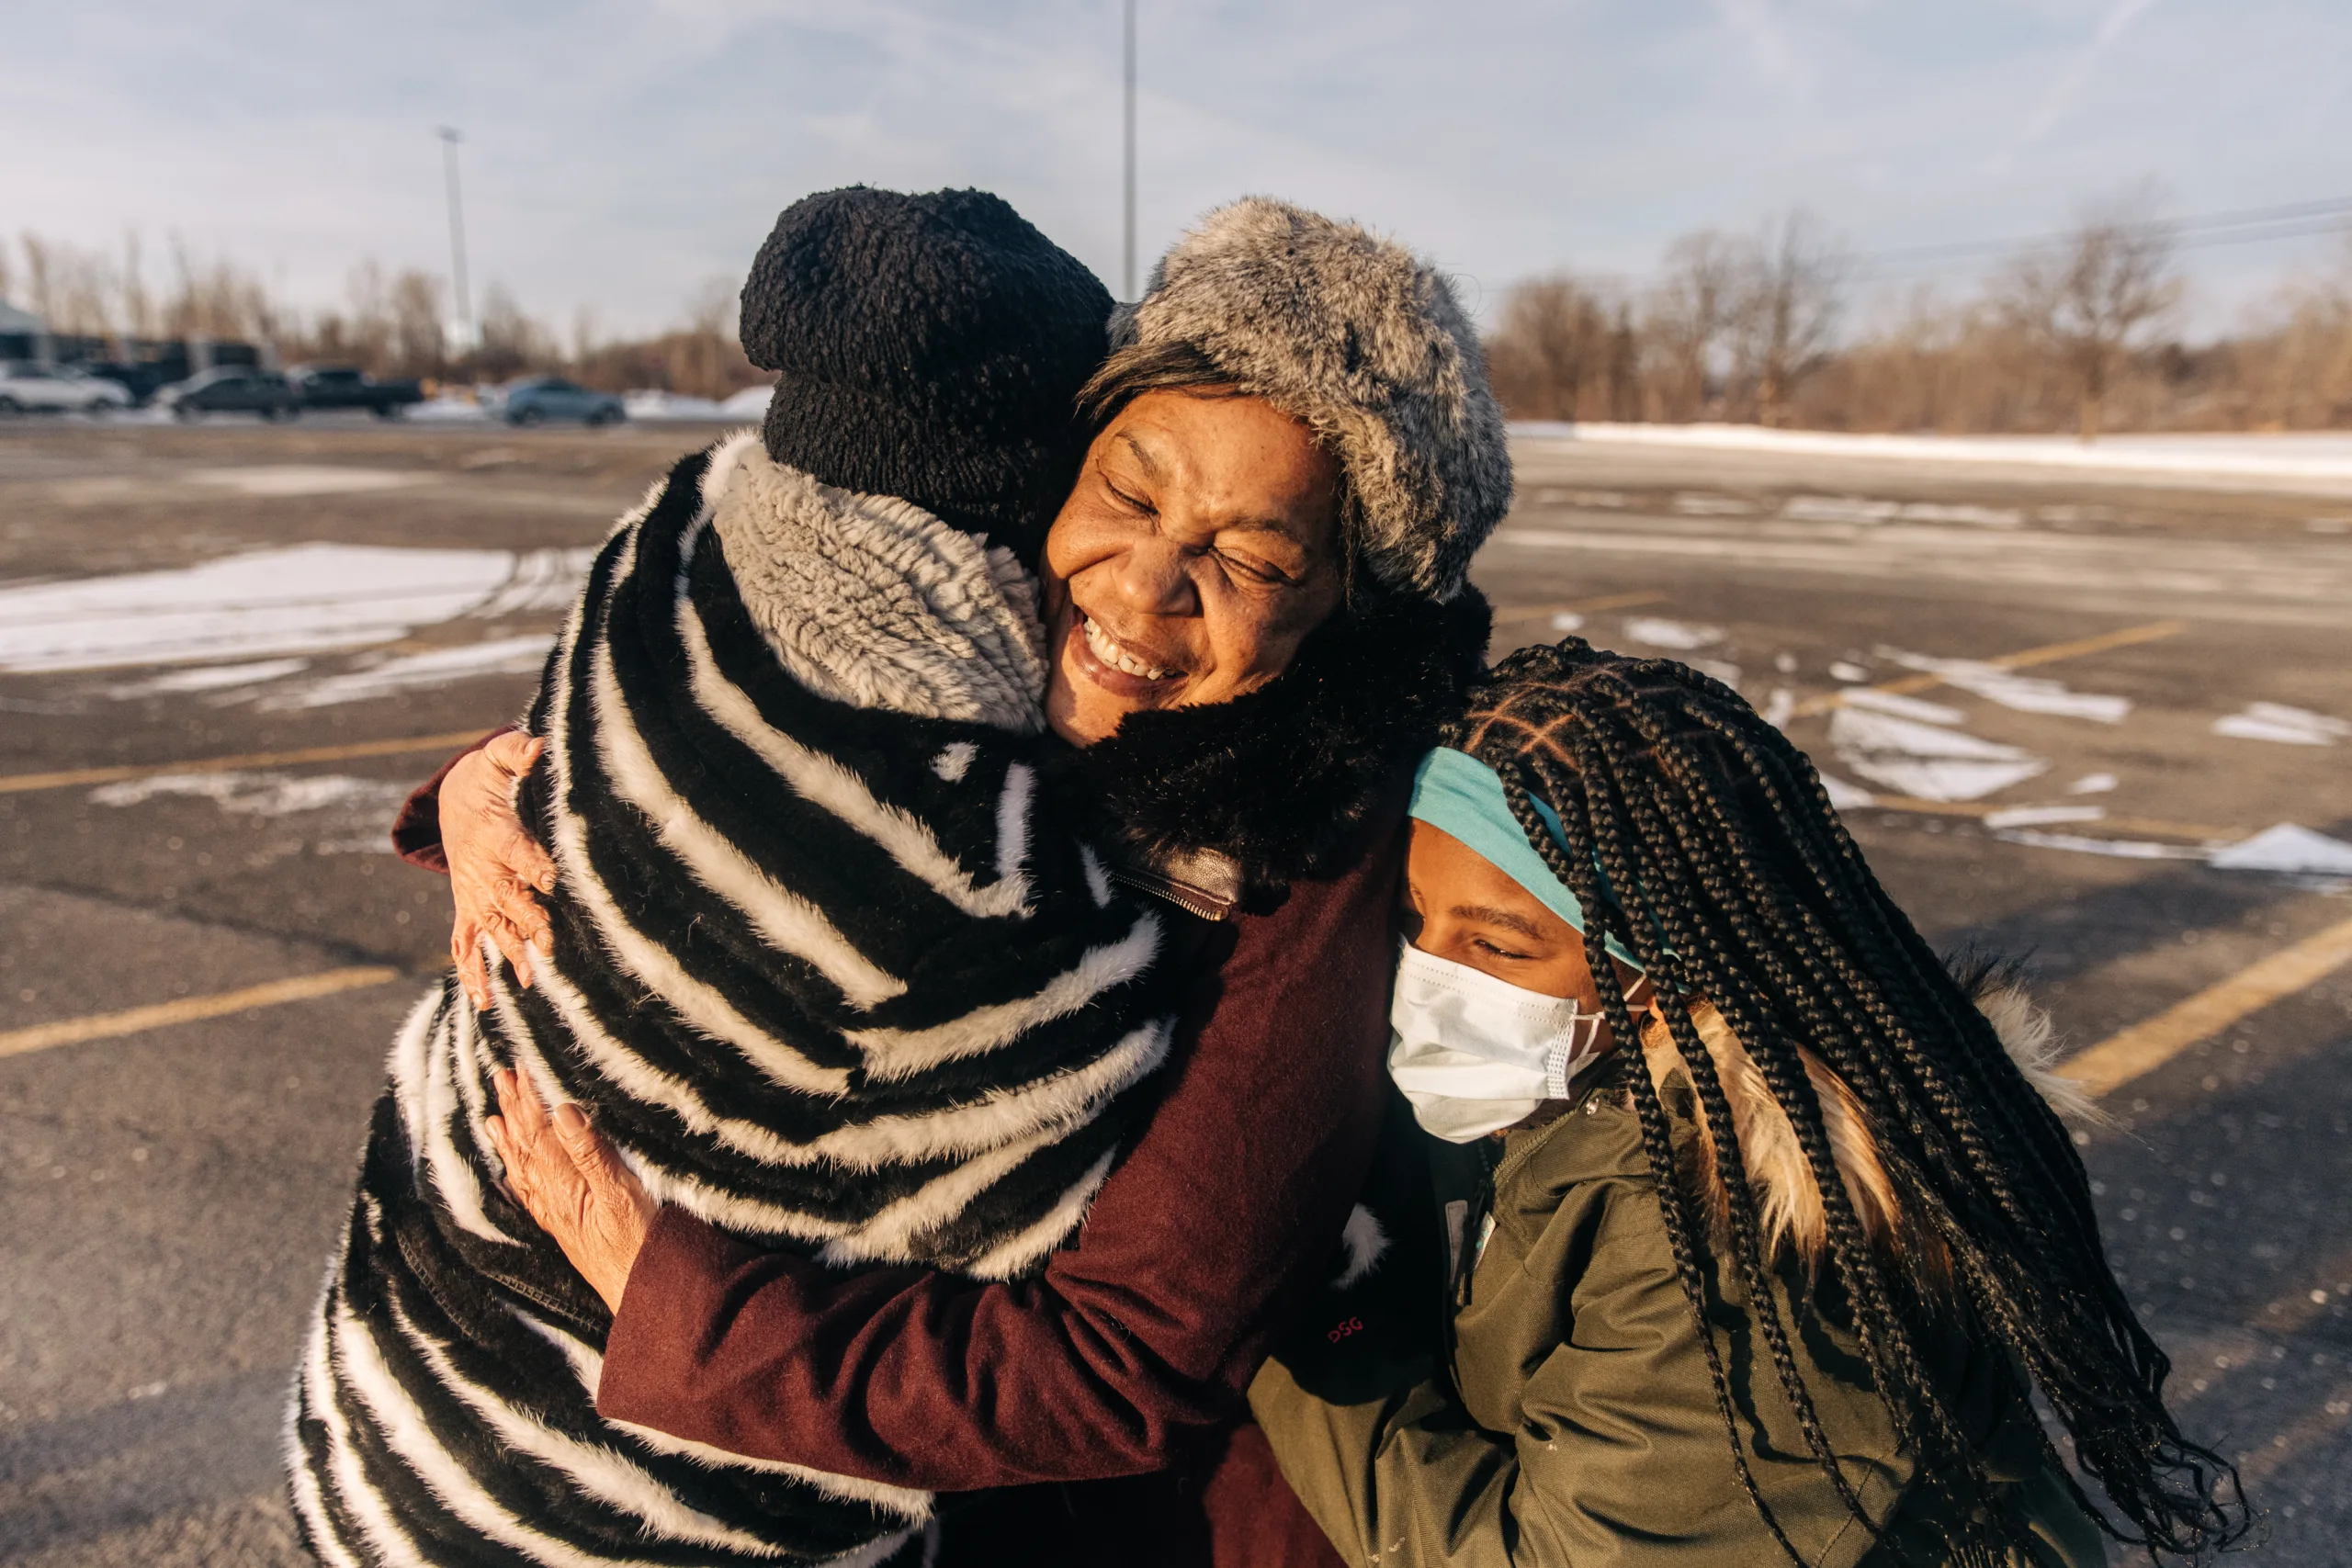 Renay Lynch hugs her daughter and granddaughter after being freed in January 2022. (Image: Jeenah Moon/Innocence Project)